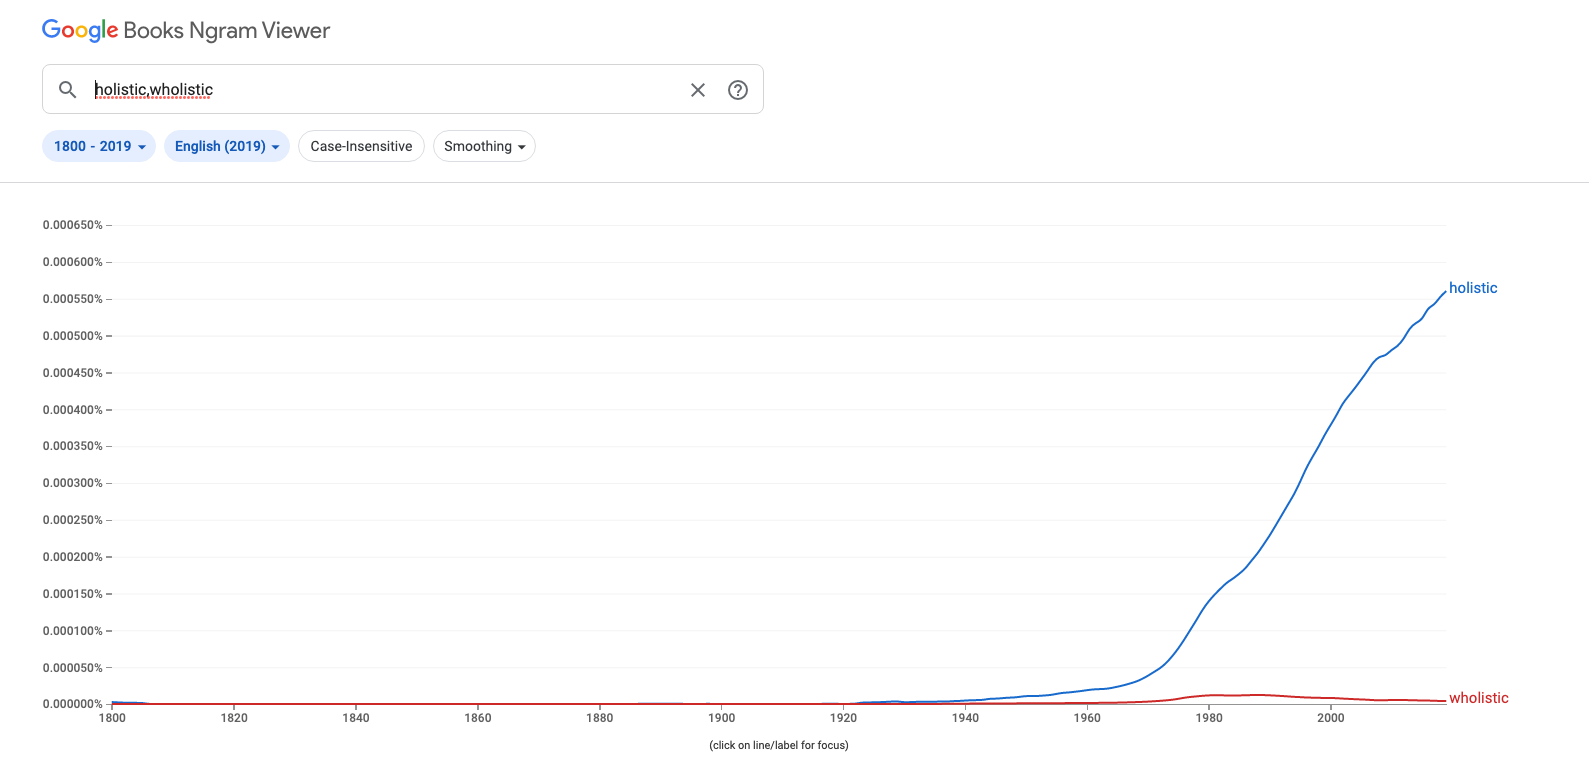 ngram for holistic and wholistic